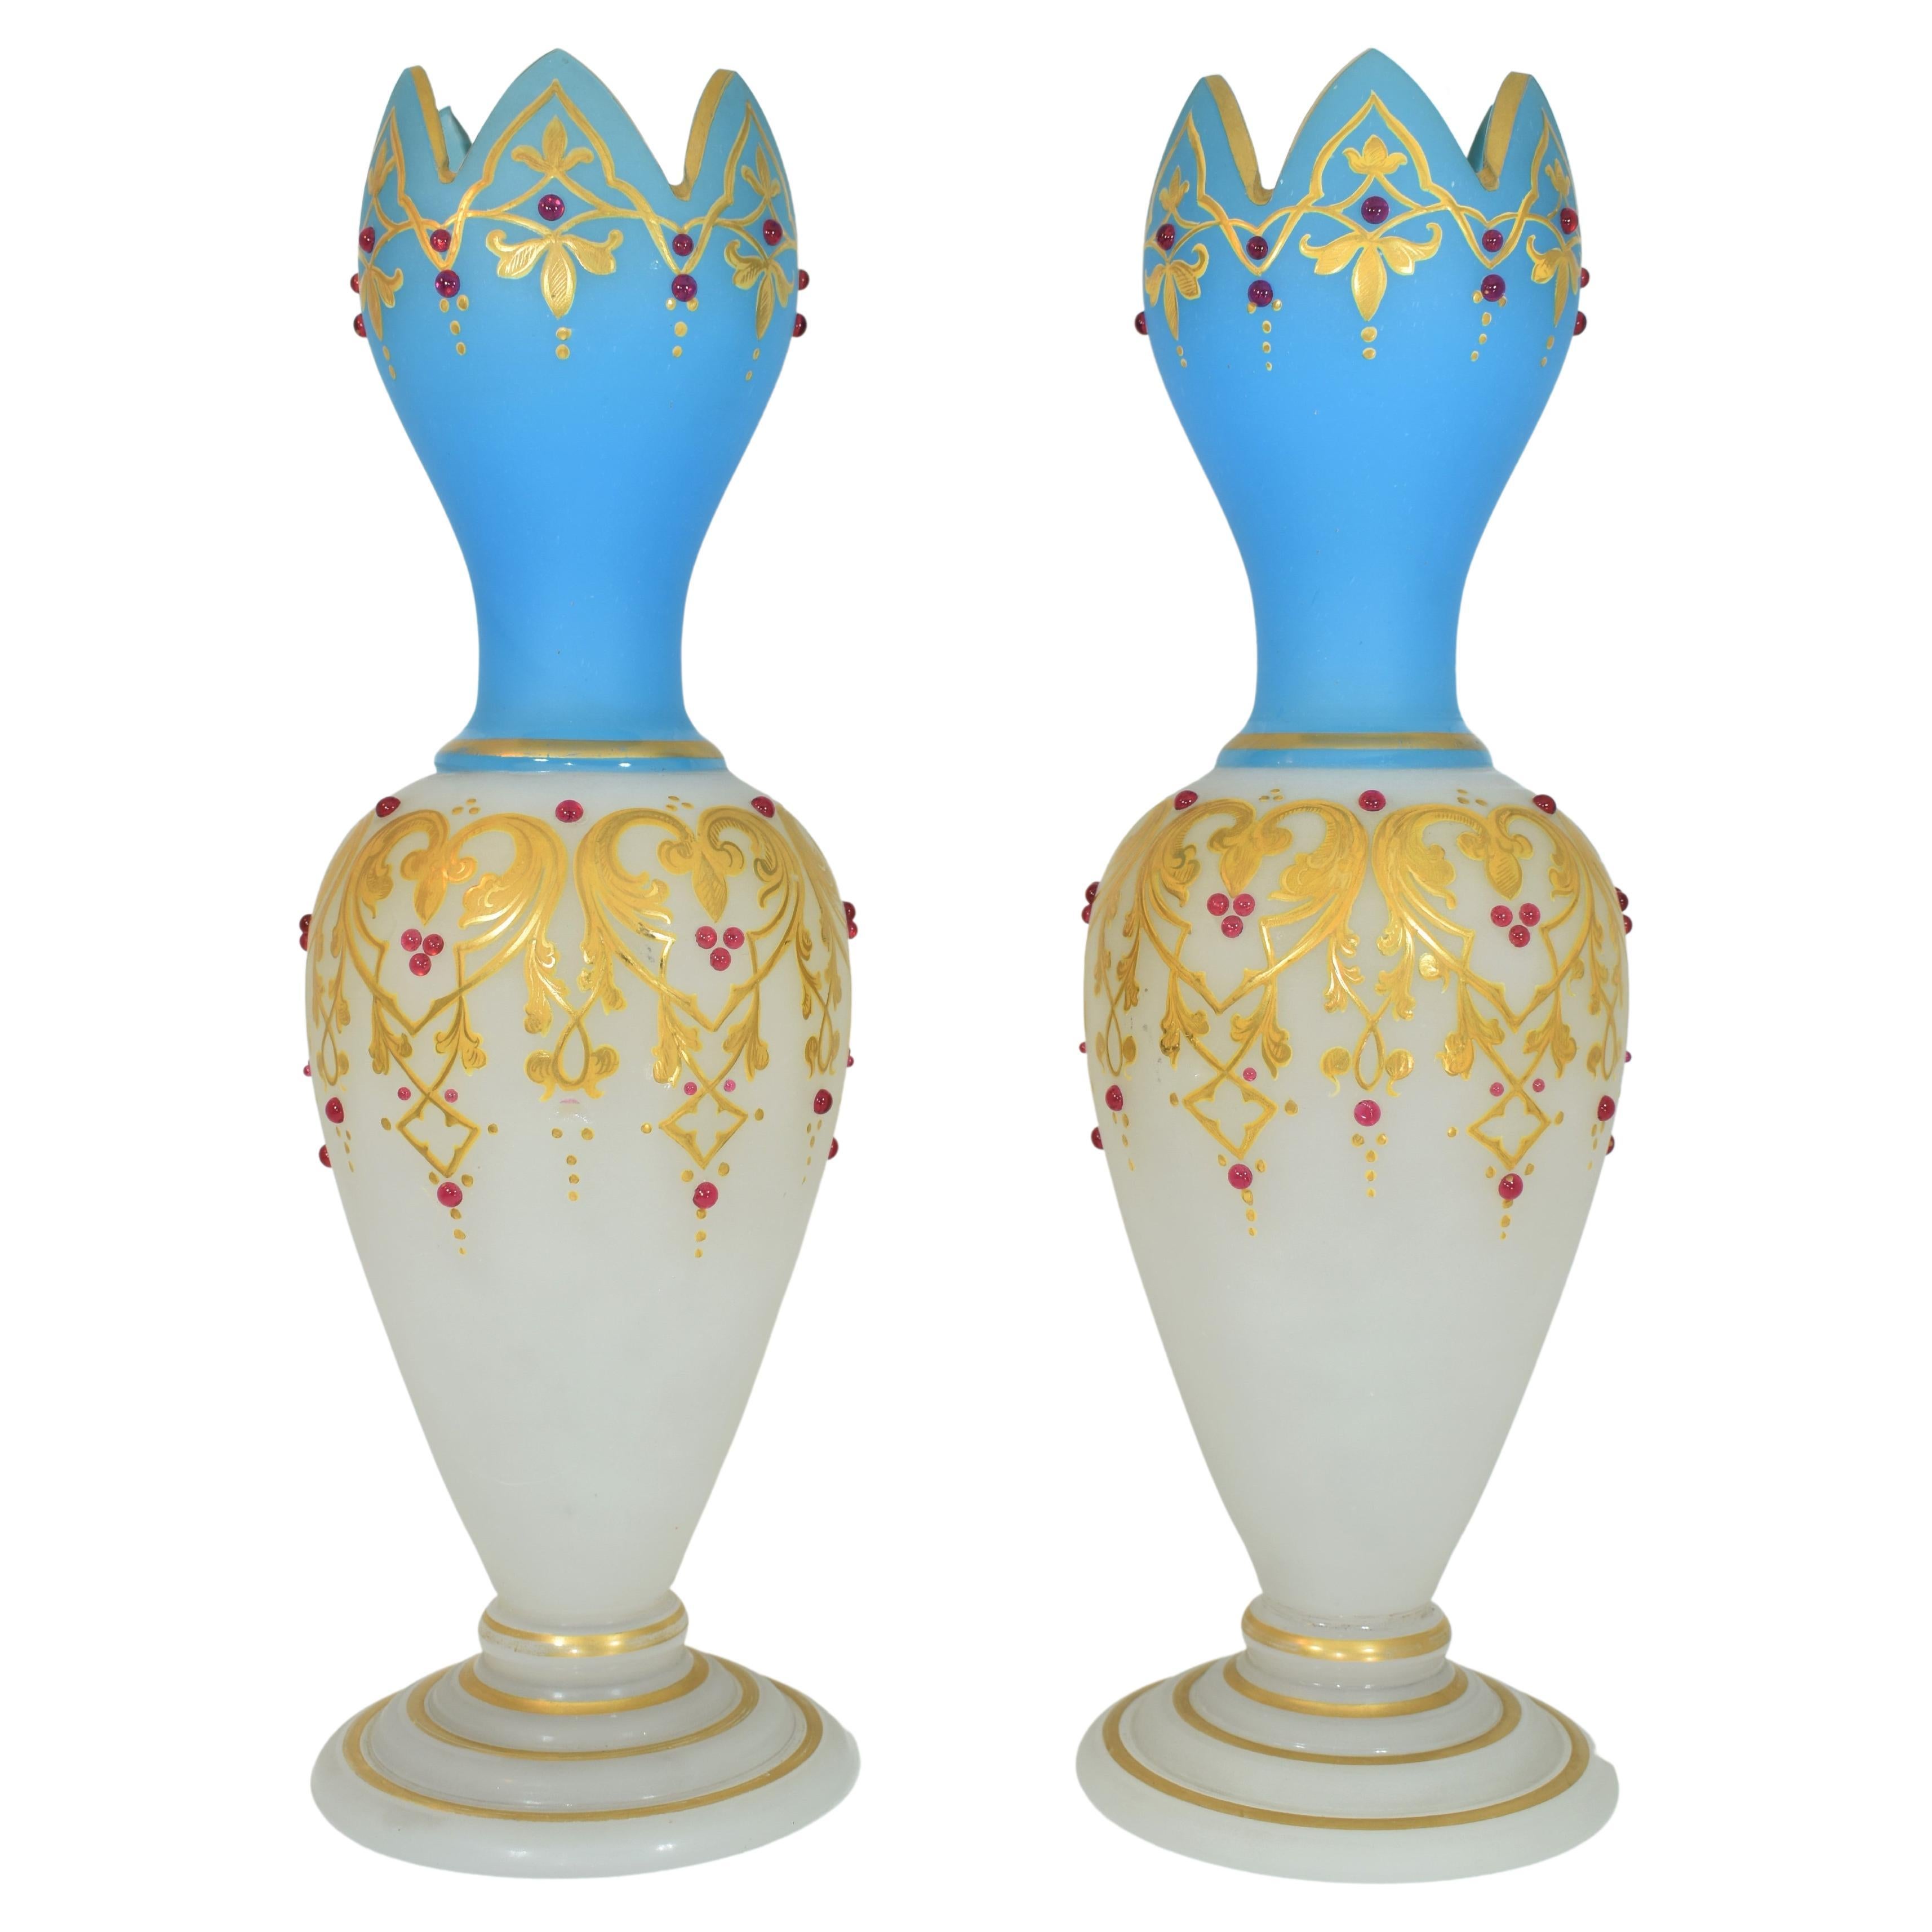 Hand-decorated with gold, enamel, and jewels! White and blue opal glass, each vase is raised on circular flat foot which is shaped in multiple gilded circles, finely applied red jewels on the circural body, richly hand-painted with enamel and 24k